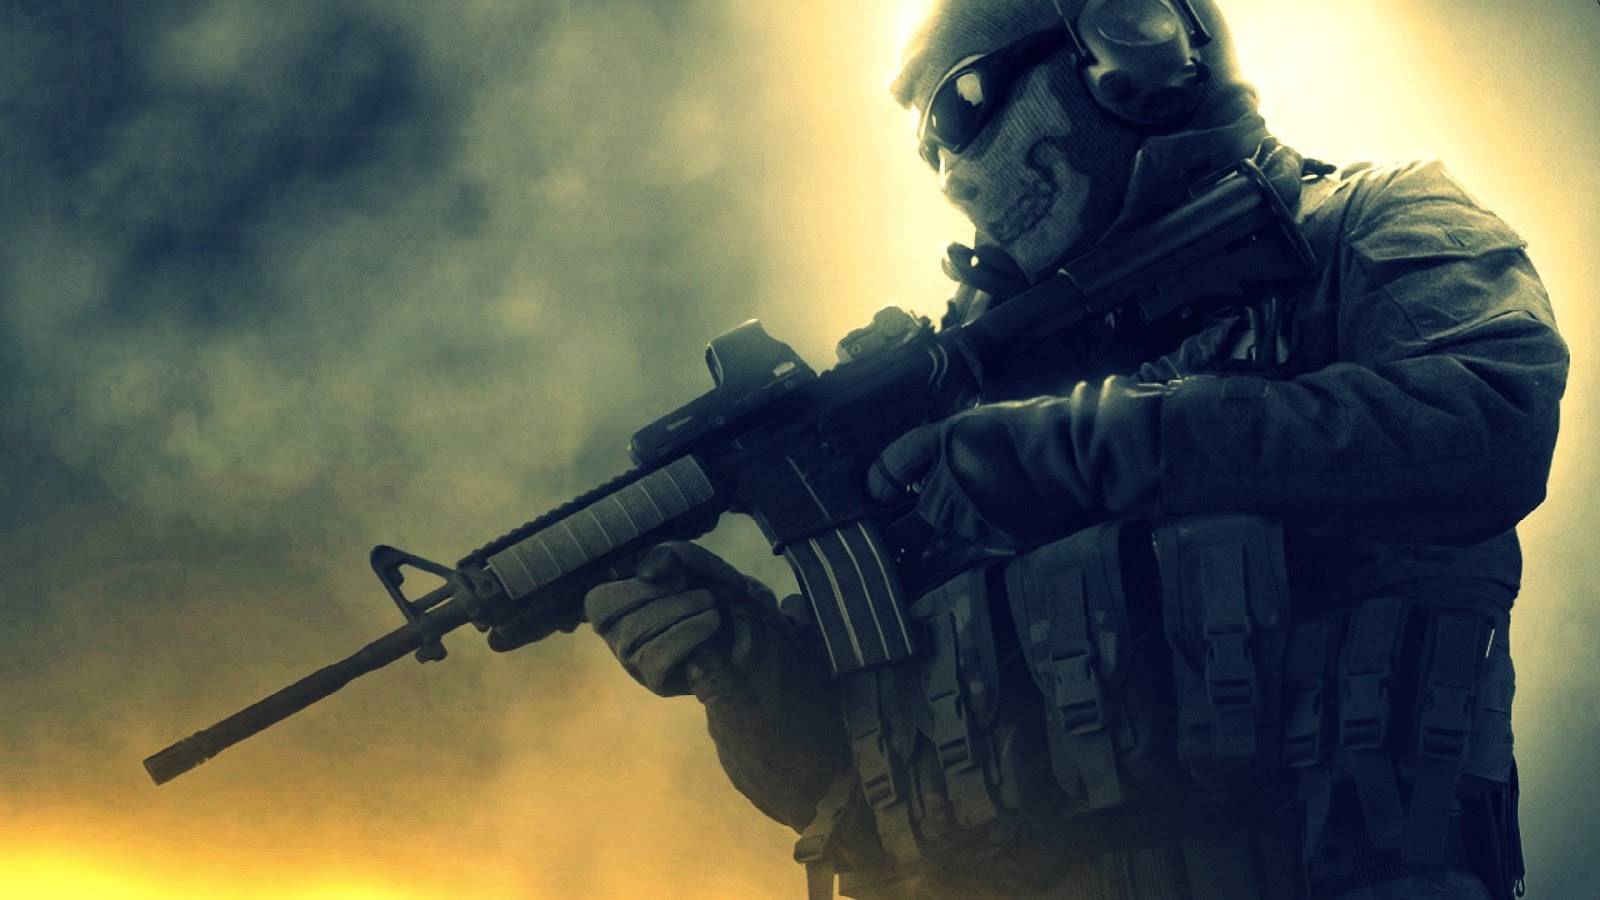 Military Soldier Widescreen Wallpaper HD And Make Your Desktop Cool